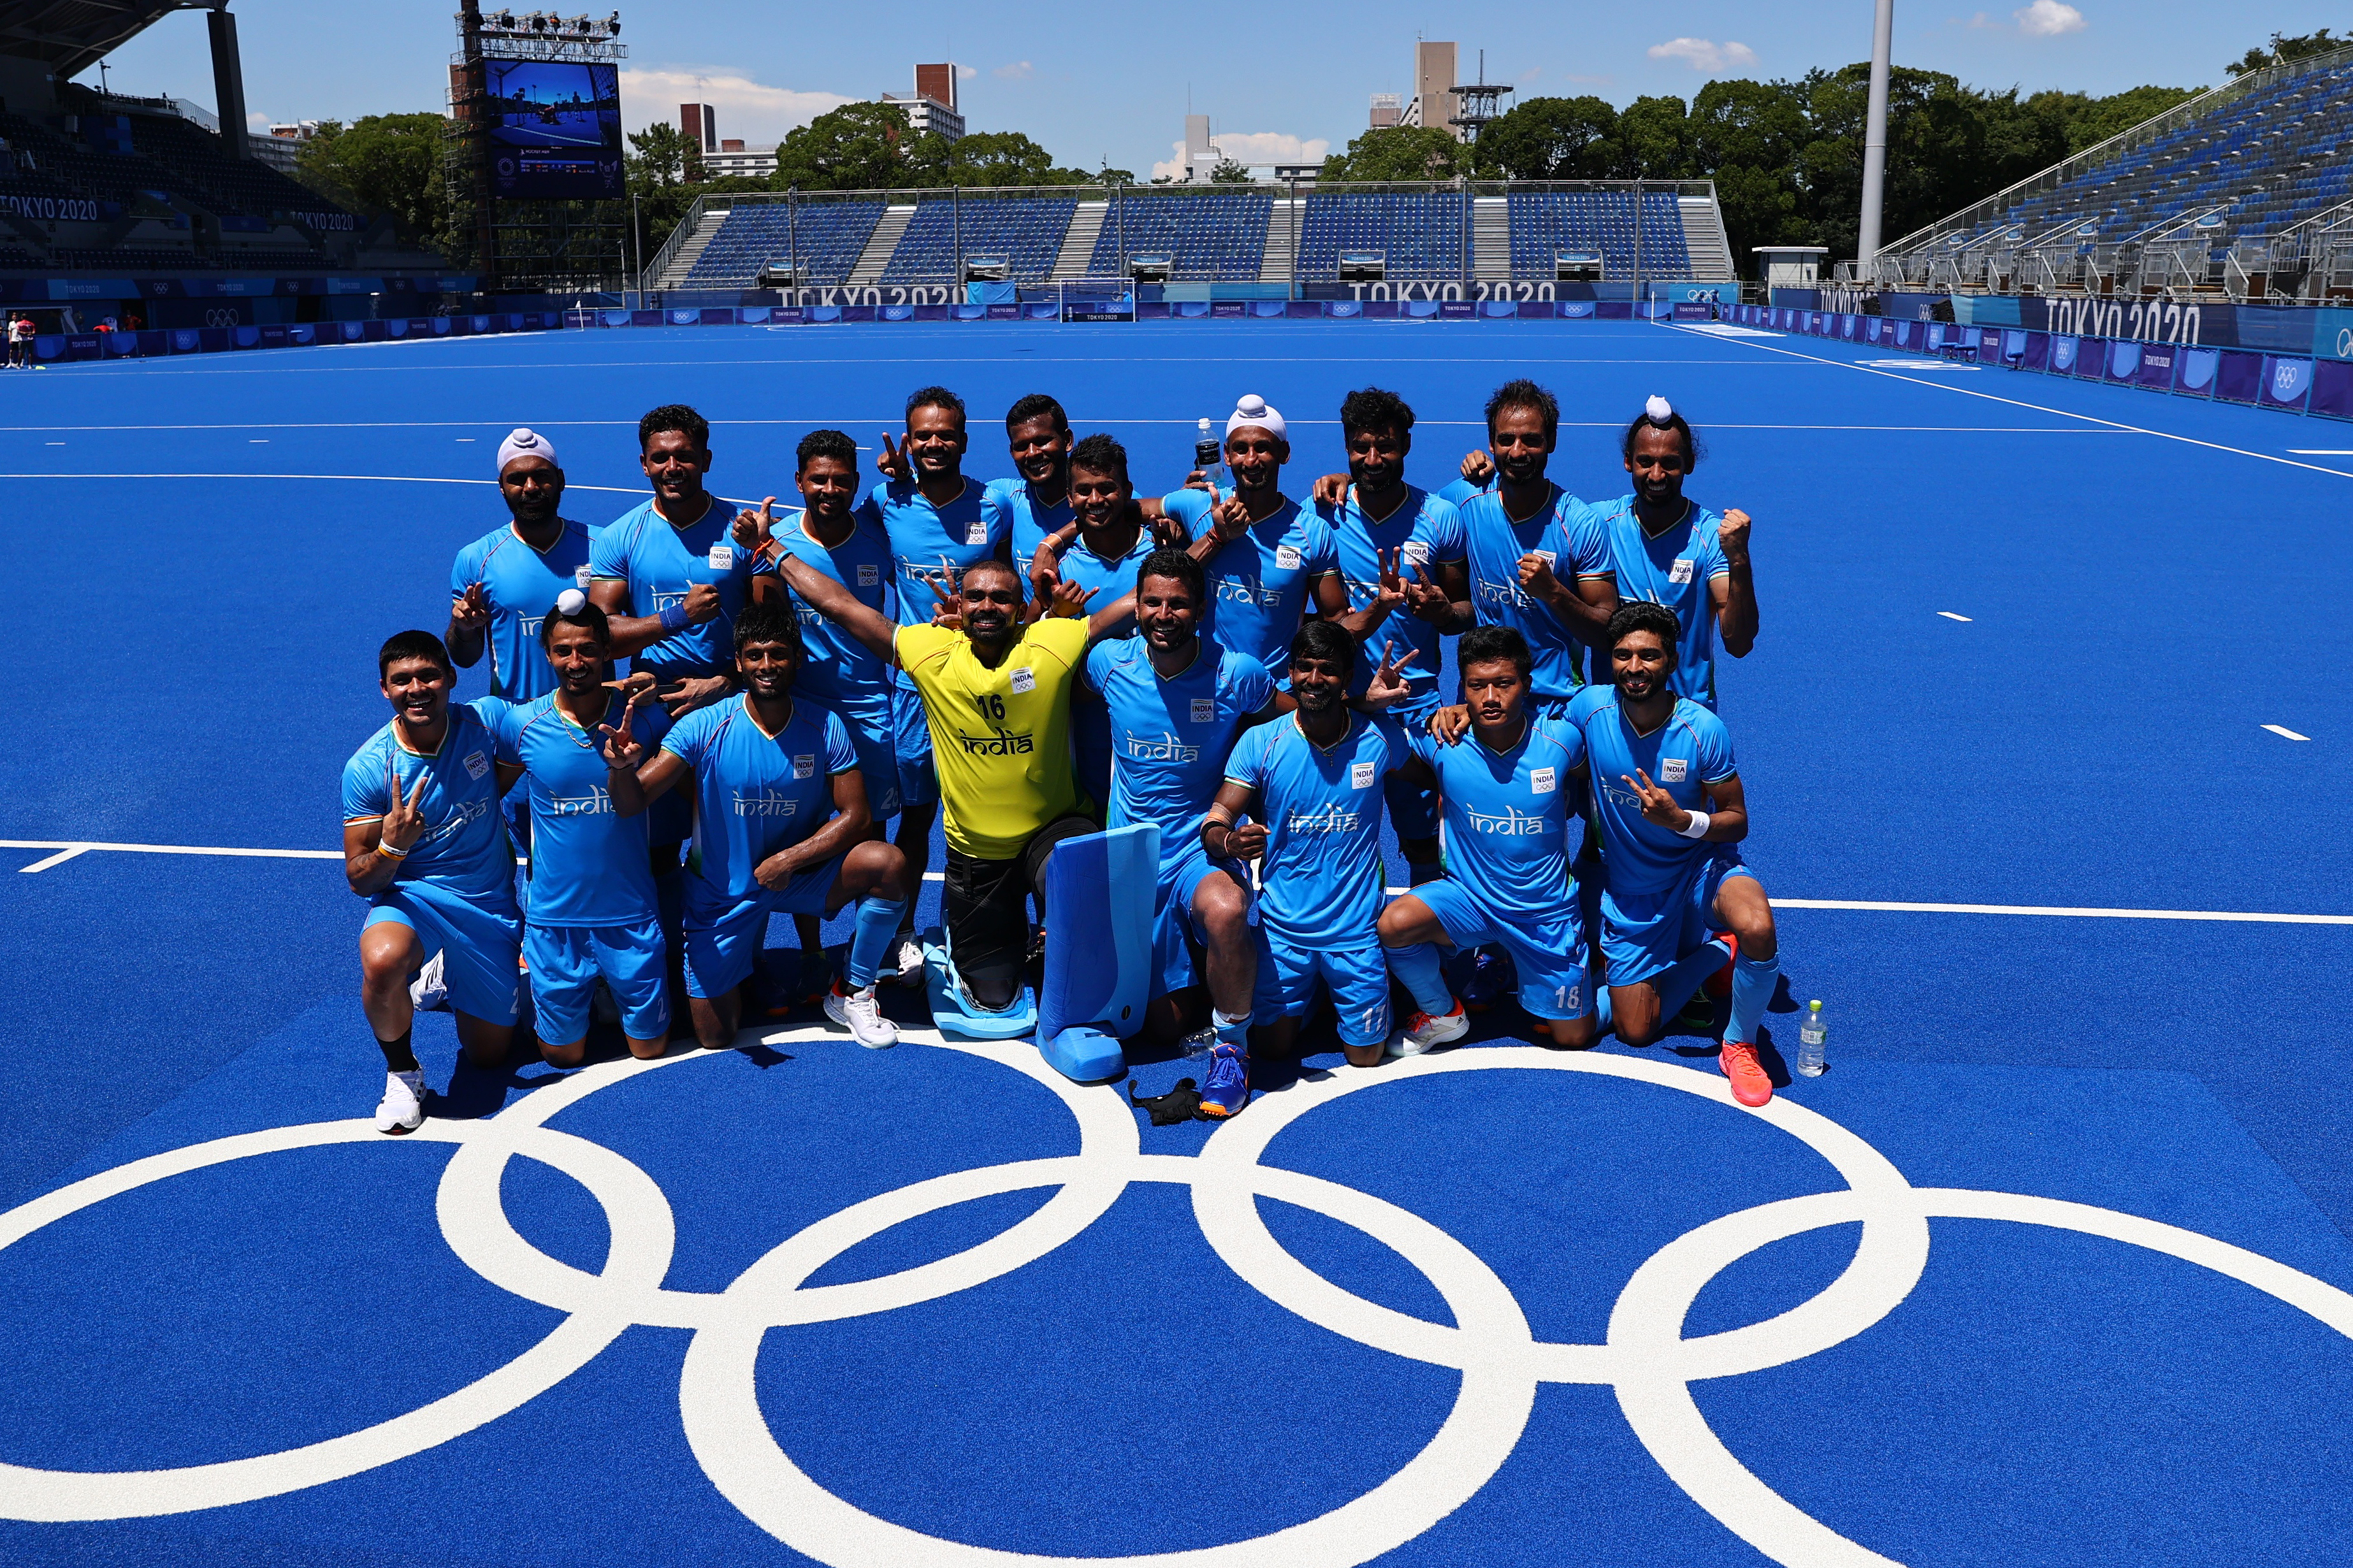 Tokyo 2020 Olympics - Hockey - Men - Bronze medal match - Germany v India - Oi Hockey Stadium, Tokyo, Japan - August 5, 2021. Players of India pose for a group photo after winning the match for bronze. REUTERS/Bernadett Szabo